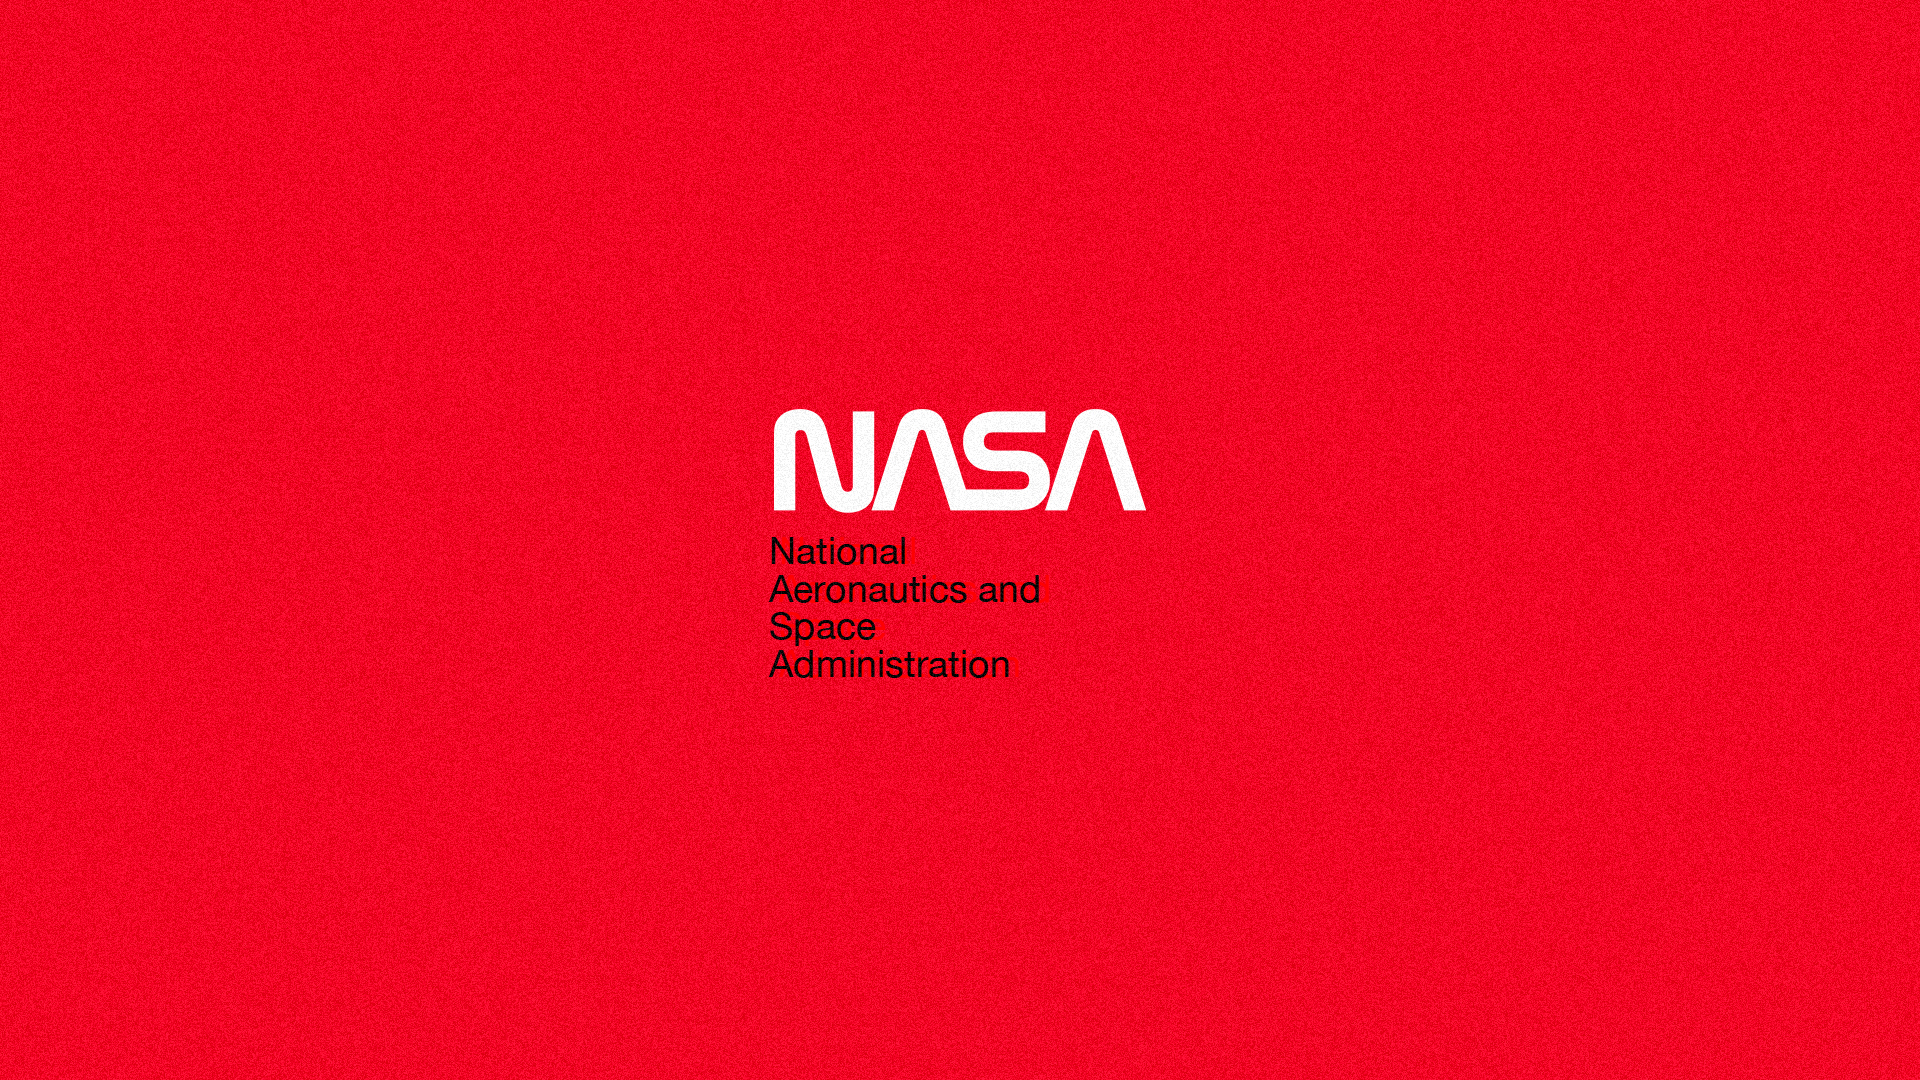 General 1920x1080 NASA logo red background simple background